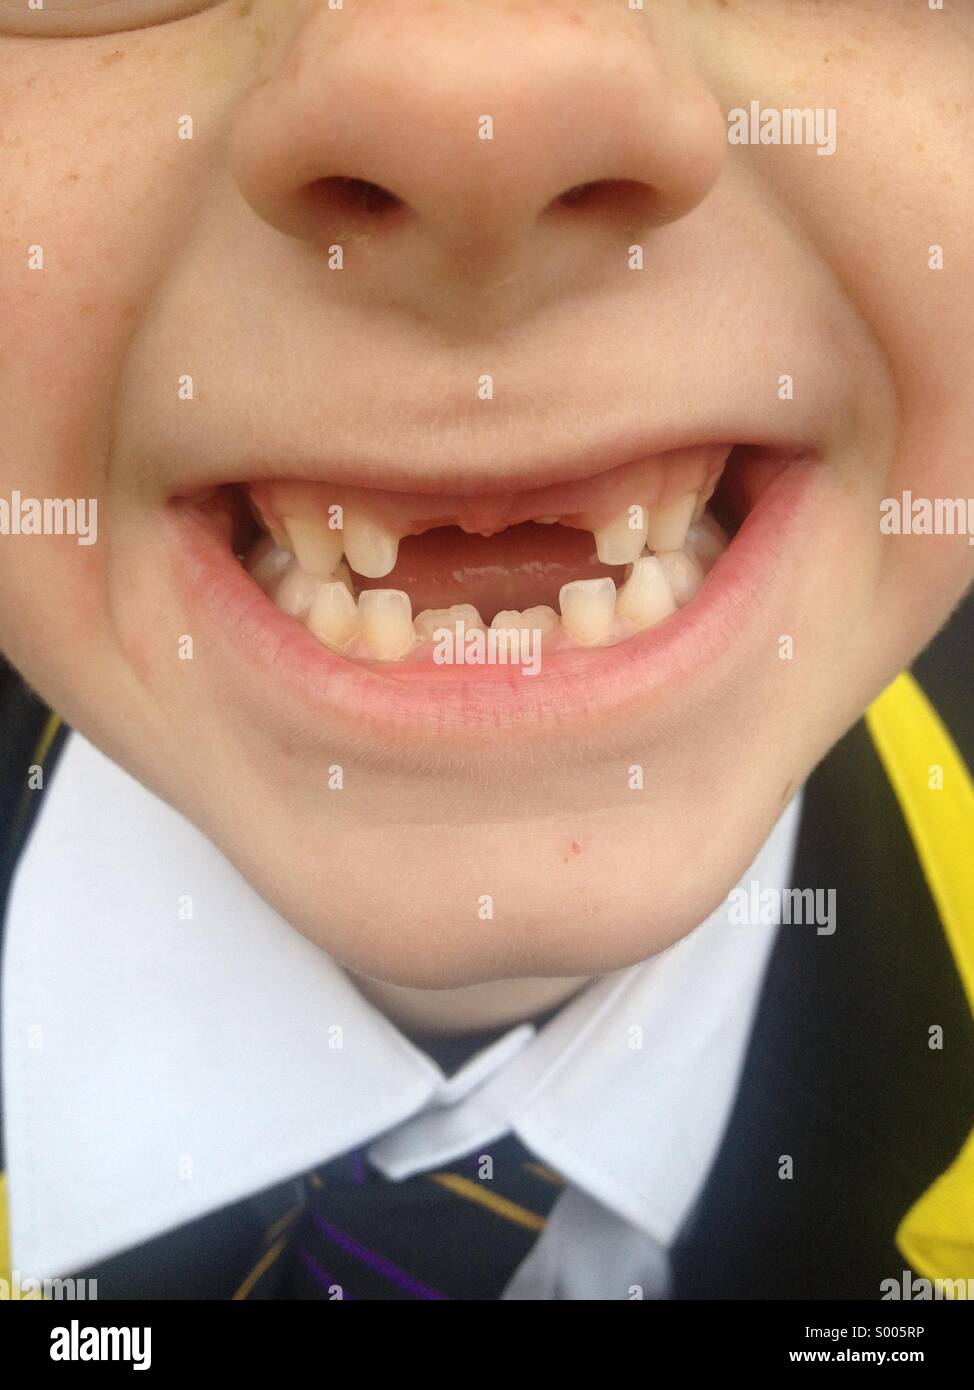 No Front Teeth Stock Photos & No Front Teeth Stock Images ...